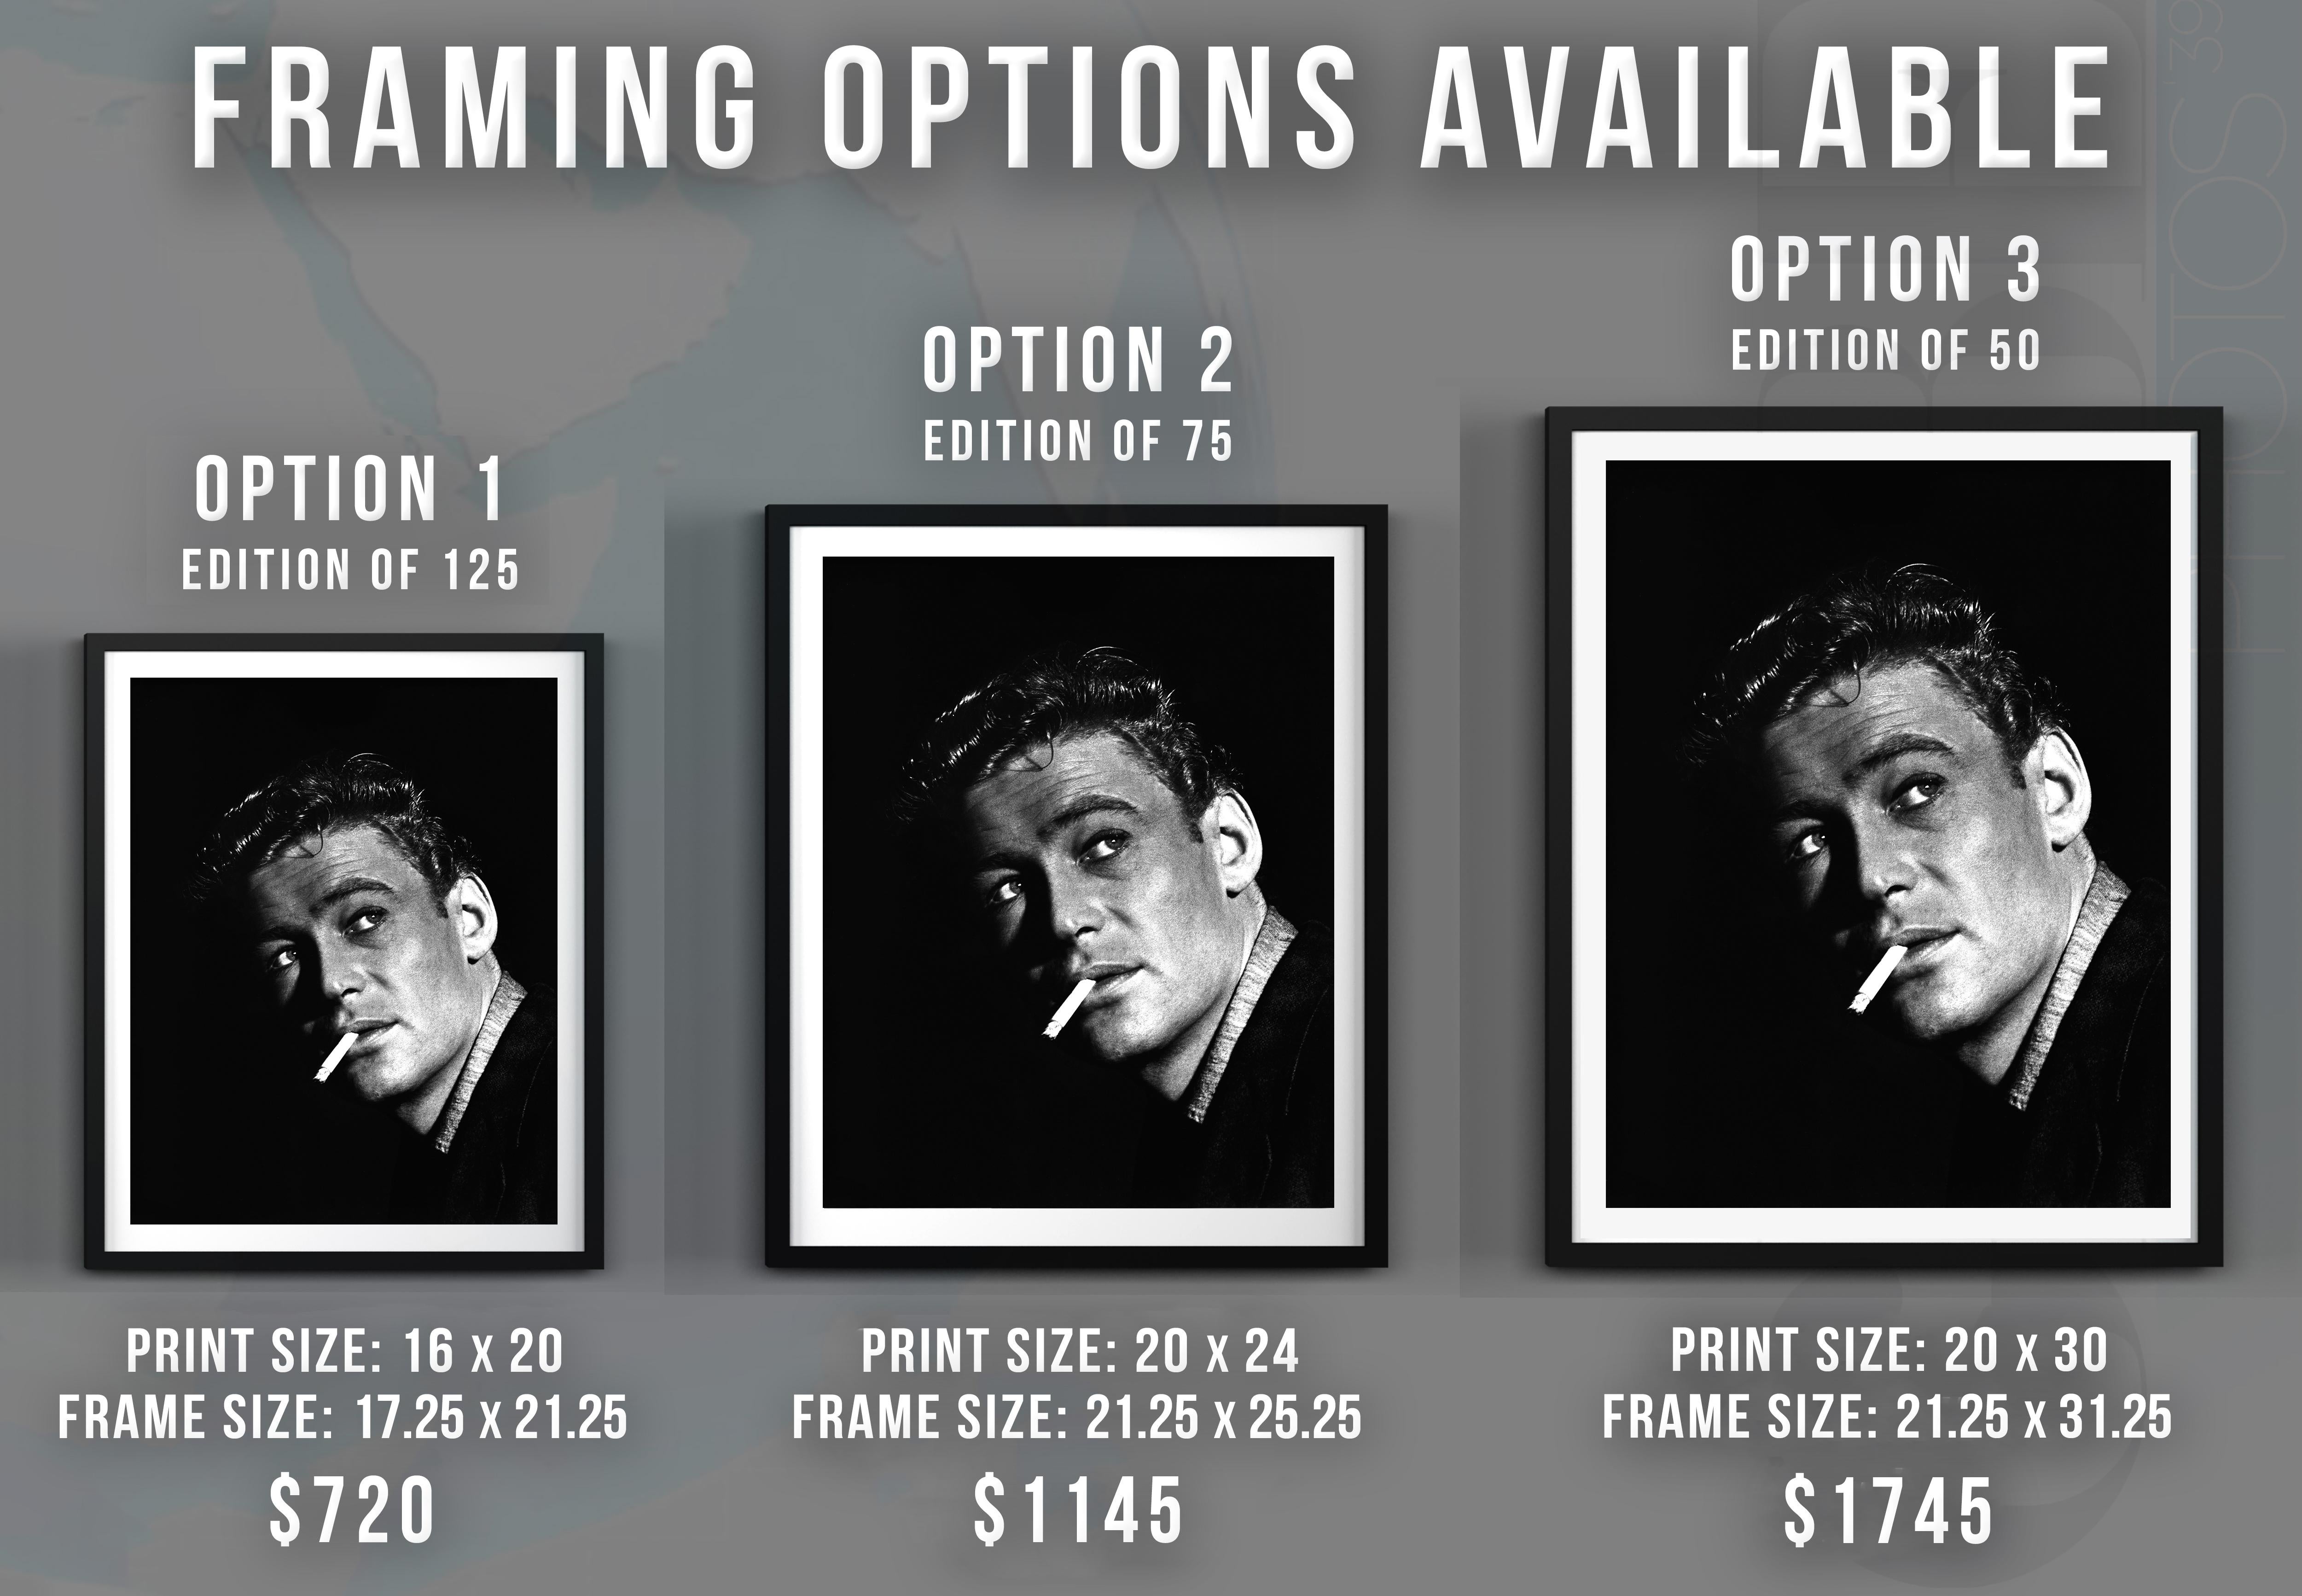 Peter O'Toole Smoking Movie Star News Fine Art Print - Black Portrait Photograph by Unknown